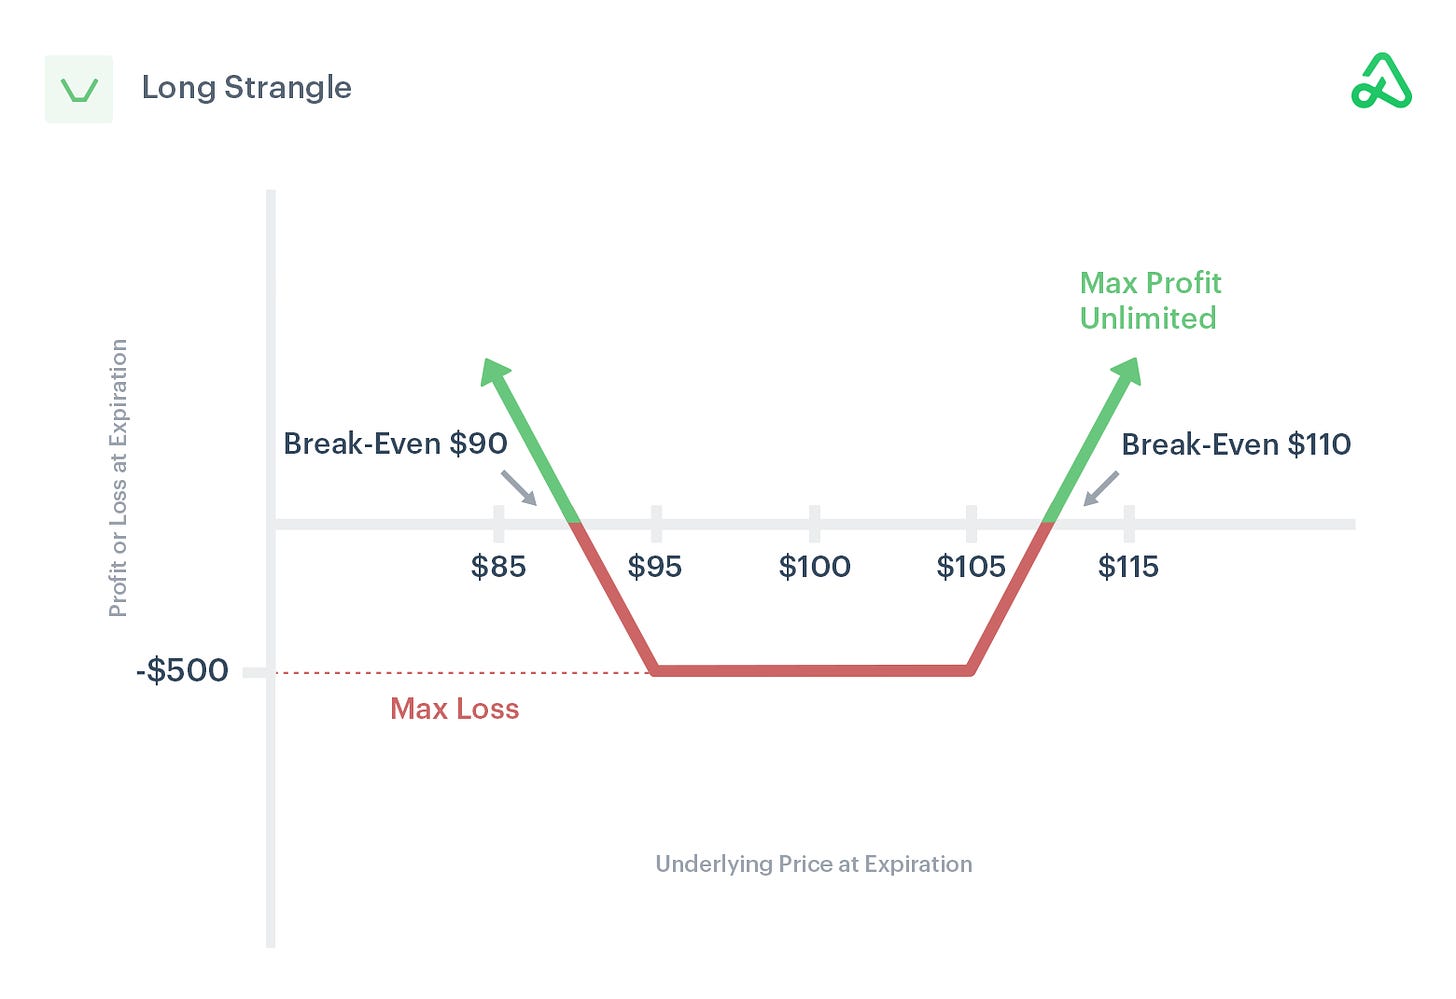 Image of long strangle payoff diagram showing max profit, max loss, and break-even points